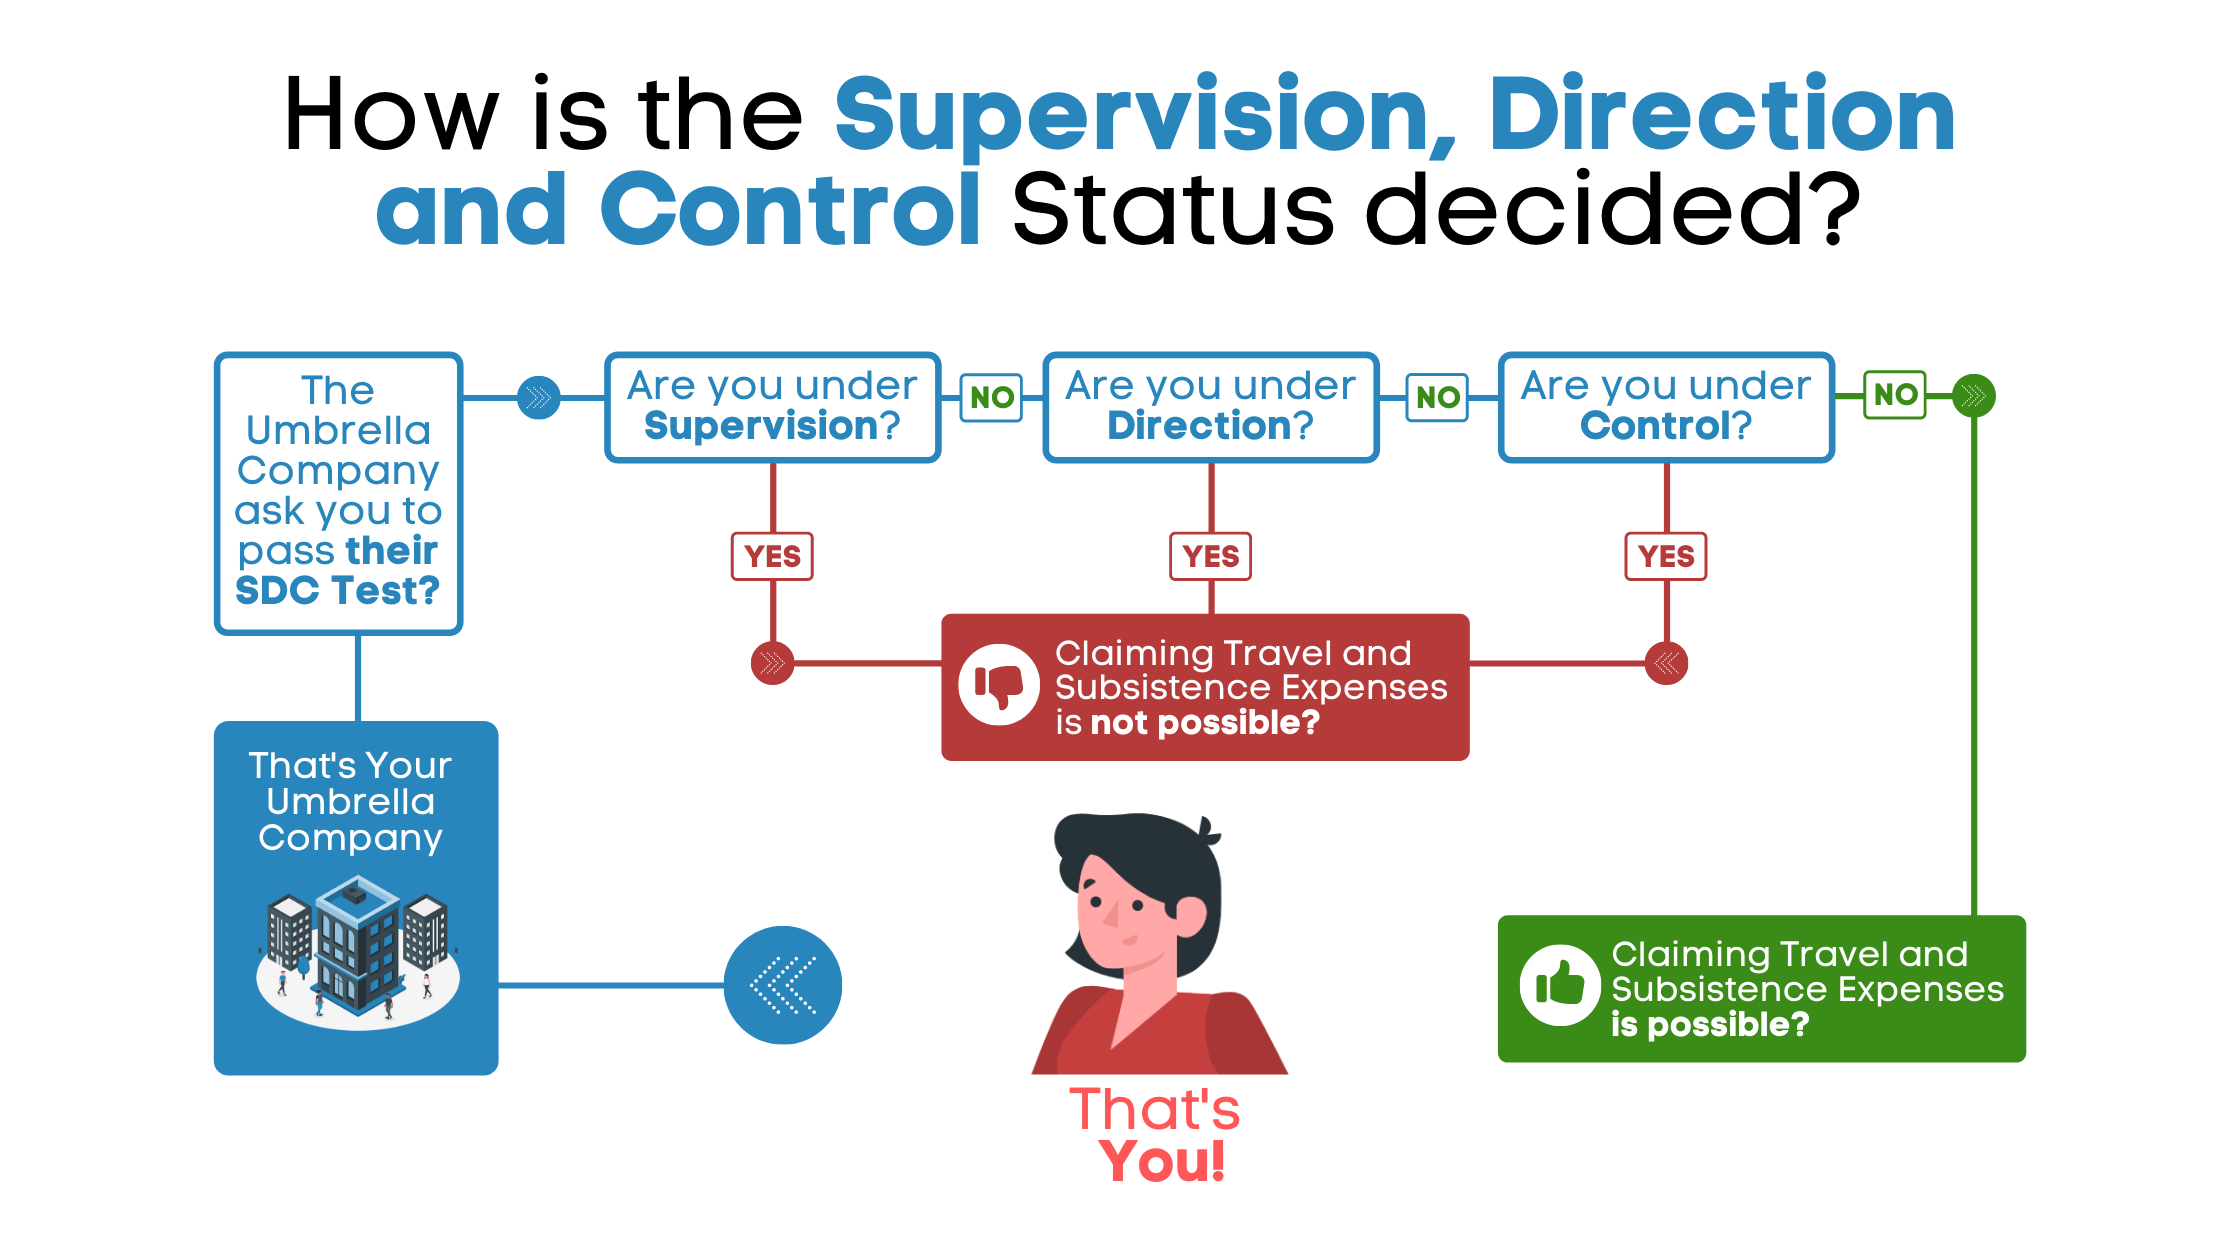 How is the supervision, direction and control status decided